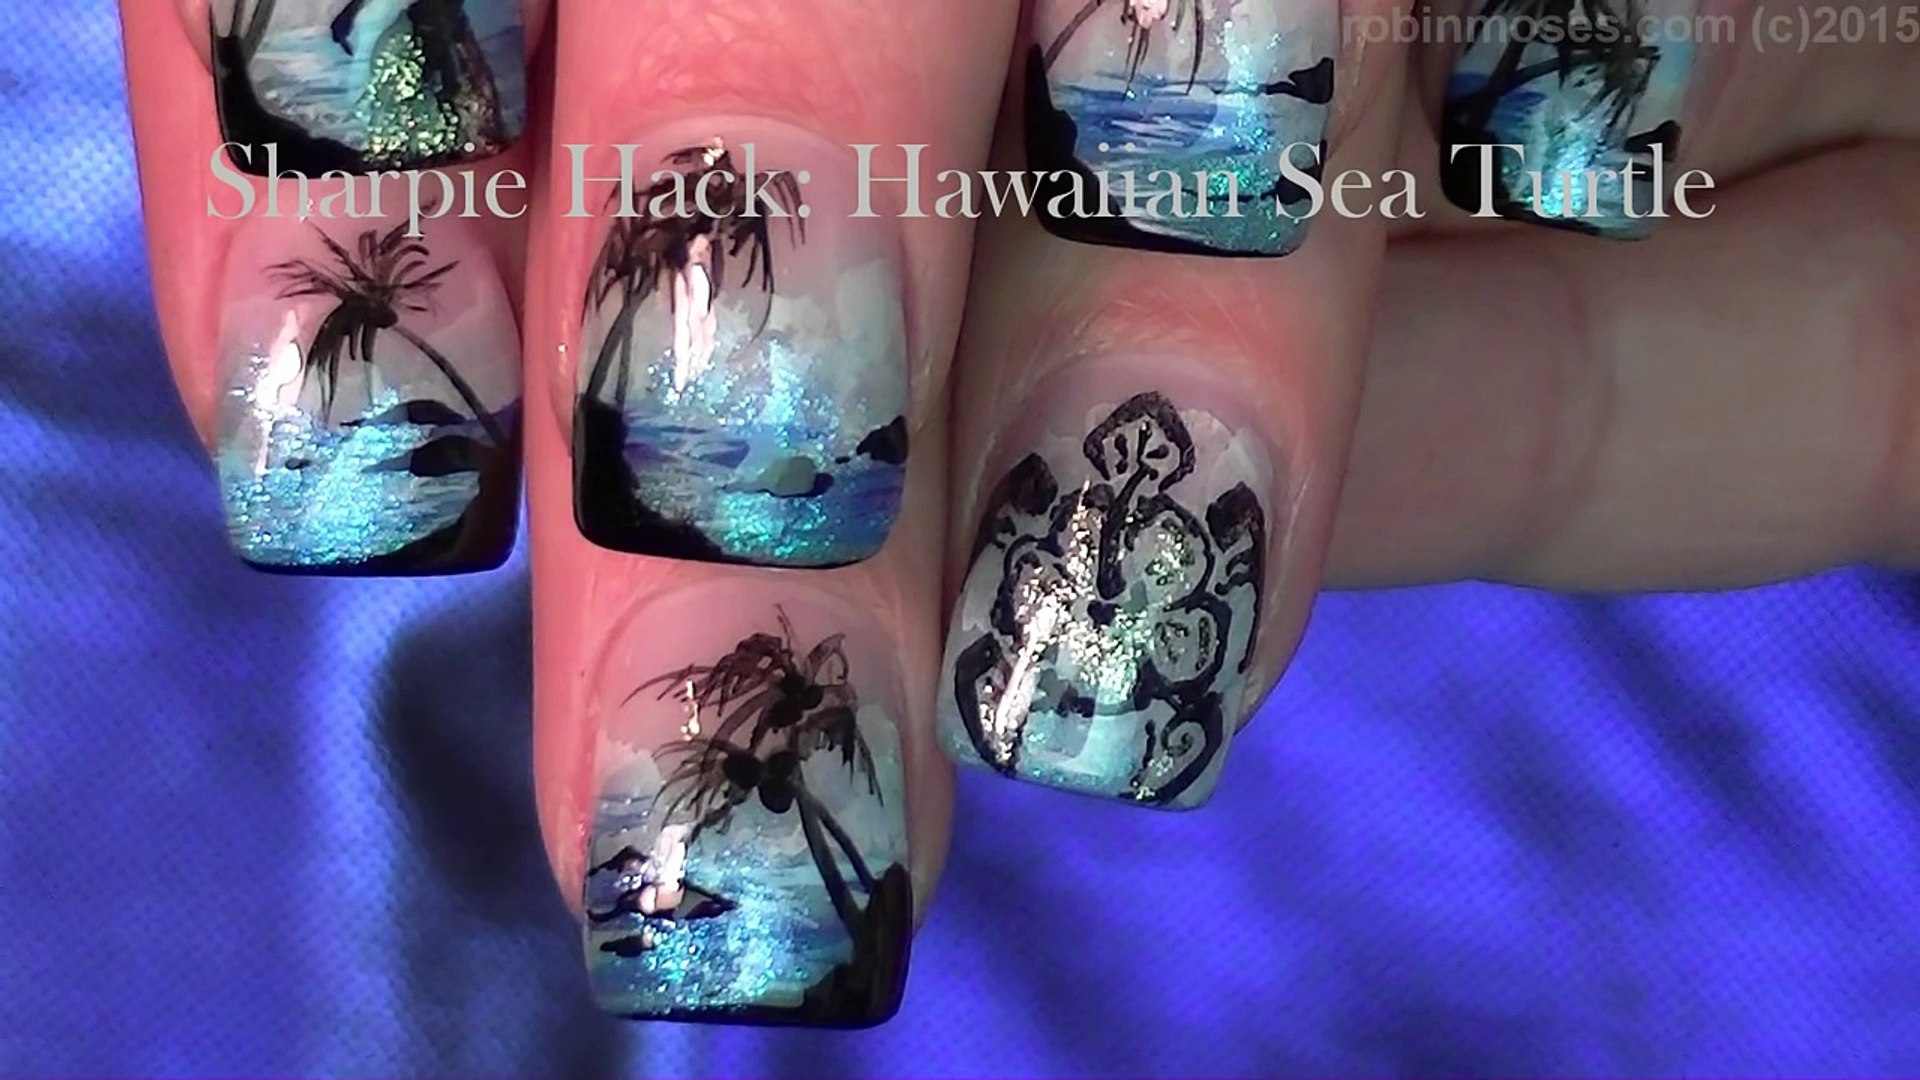 4. "Nail Art Designs for Short Nails" on Dailymotion - wide 1